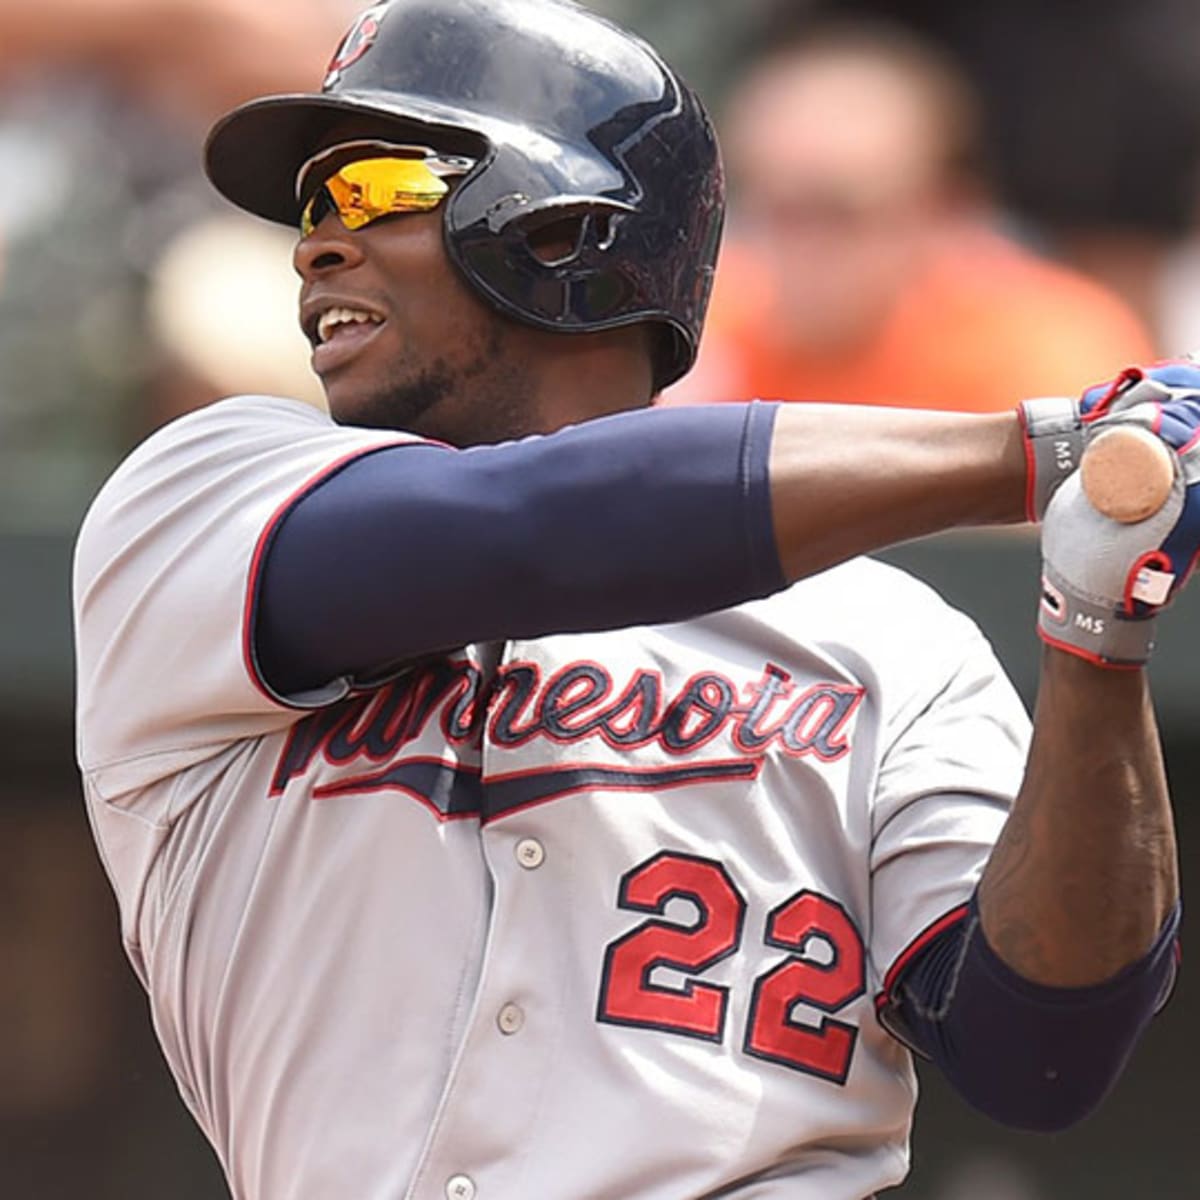 Miguel Sano: From the Dominican Republic to baseball's major leagues